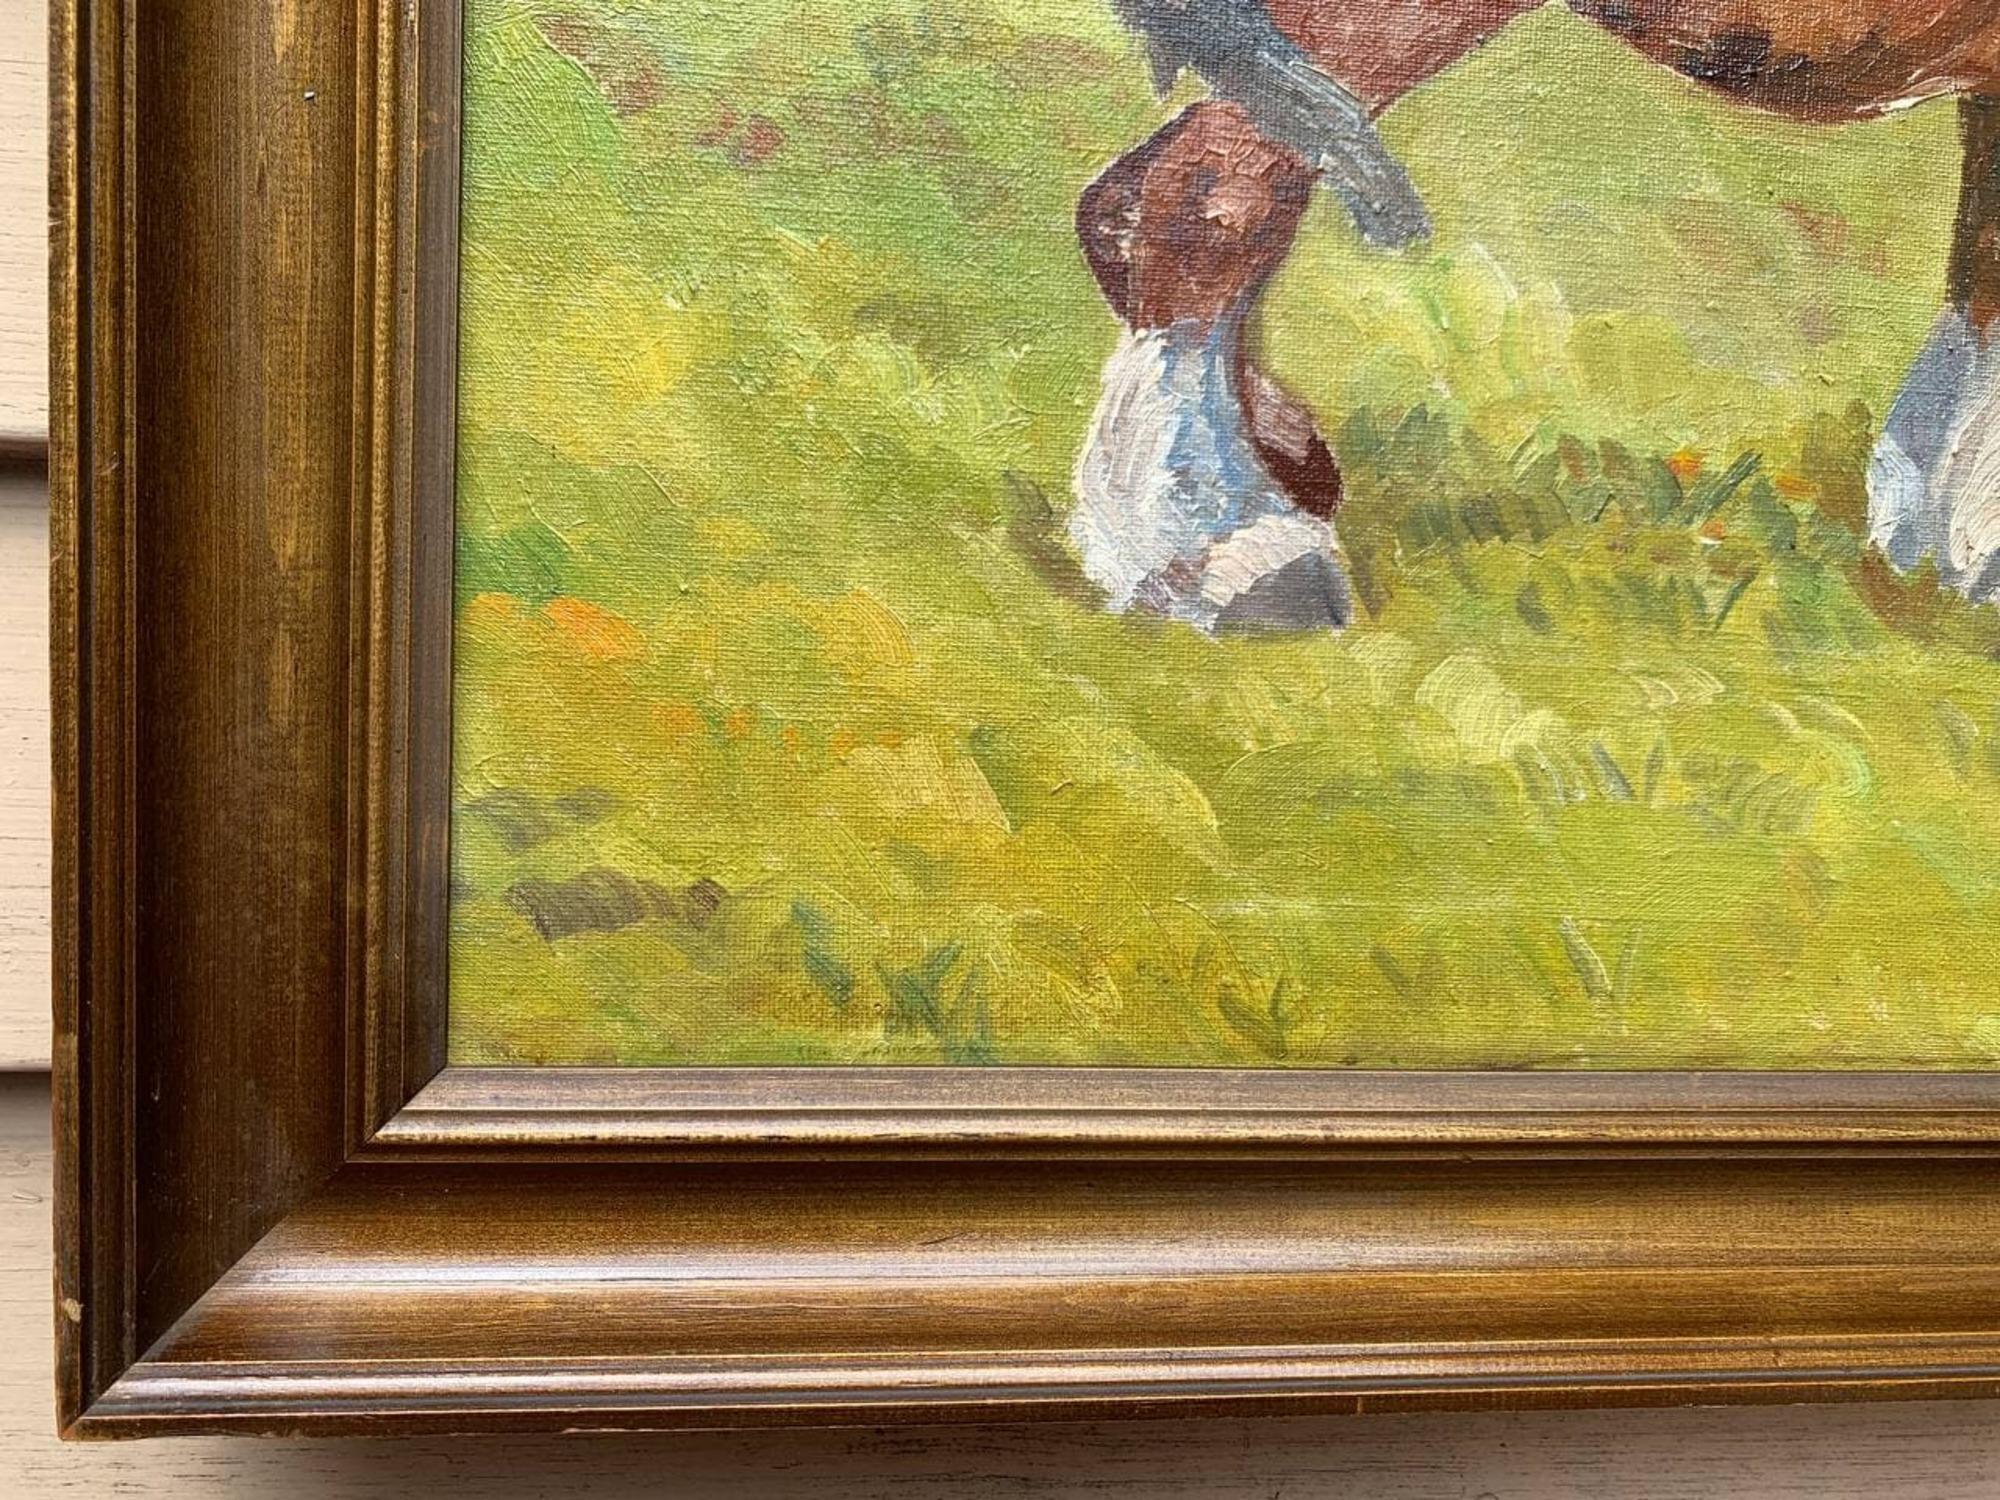 Up for sale is a  beautiful vintage/antique oil painting on canvas by  Danish Artist depicting horses in the field. 

Signed indistinctly in a lower right corner and dated 1938. 

Dimensions: (Frame) 26.5